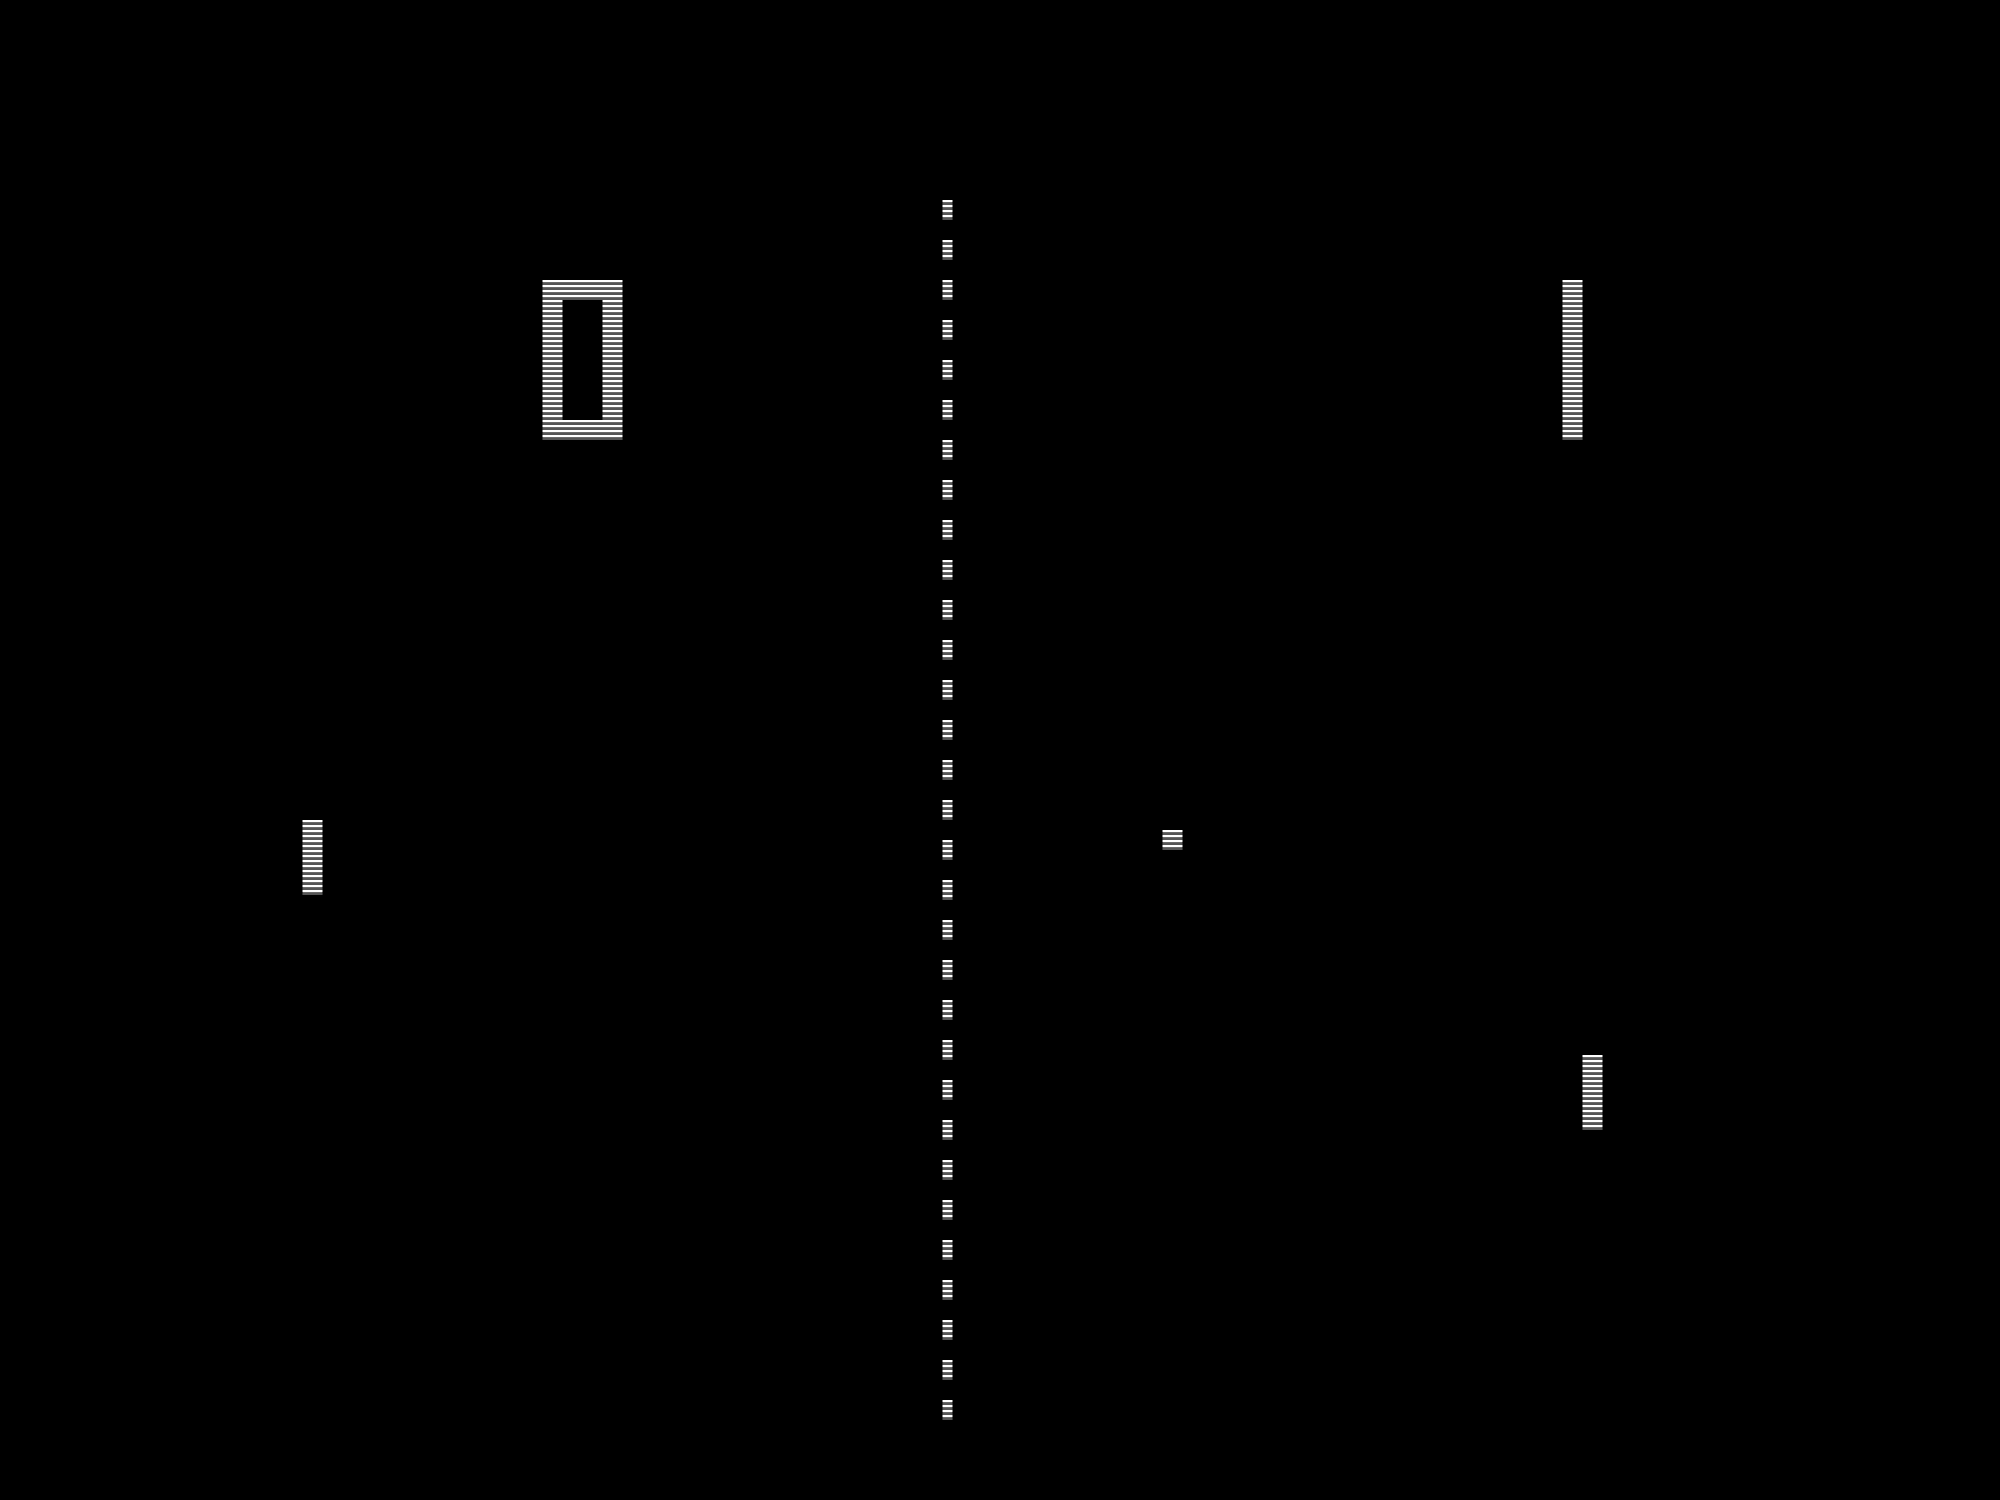 pong-the-first-video-game-megahit